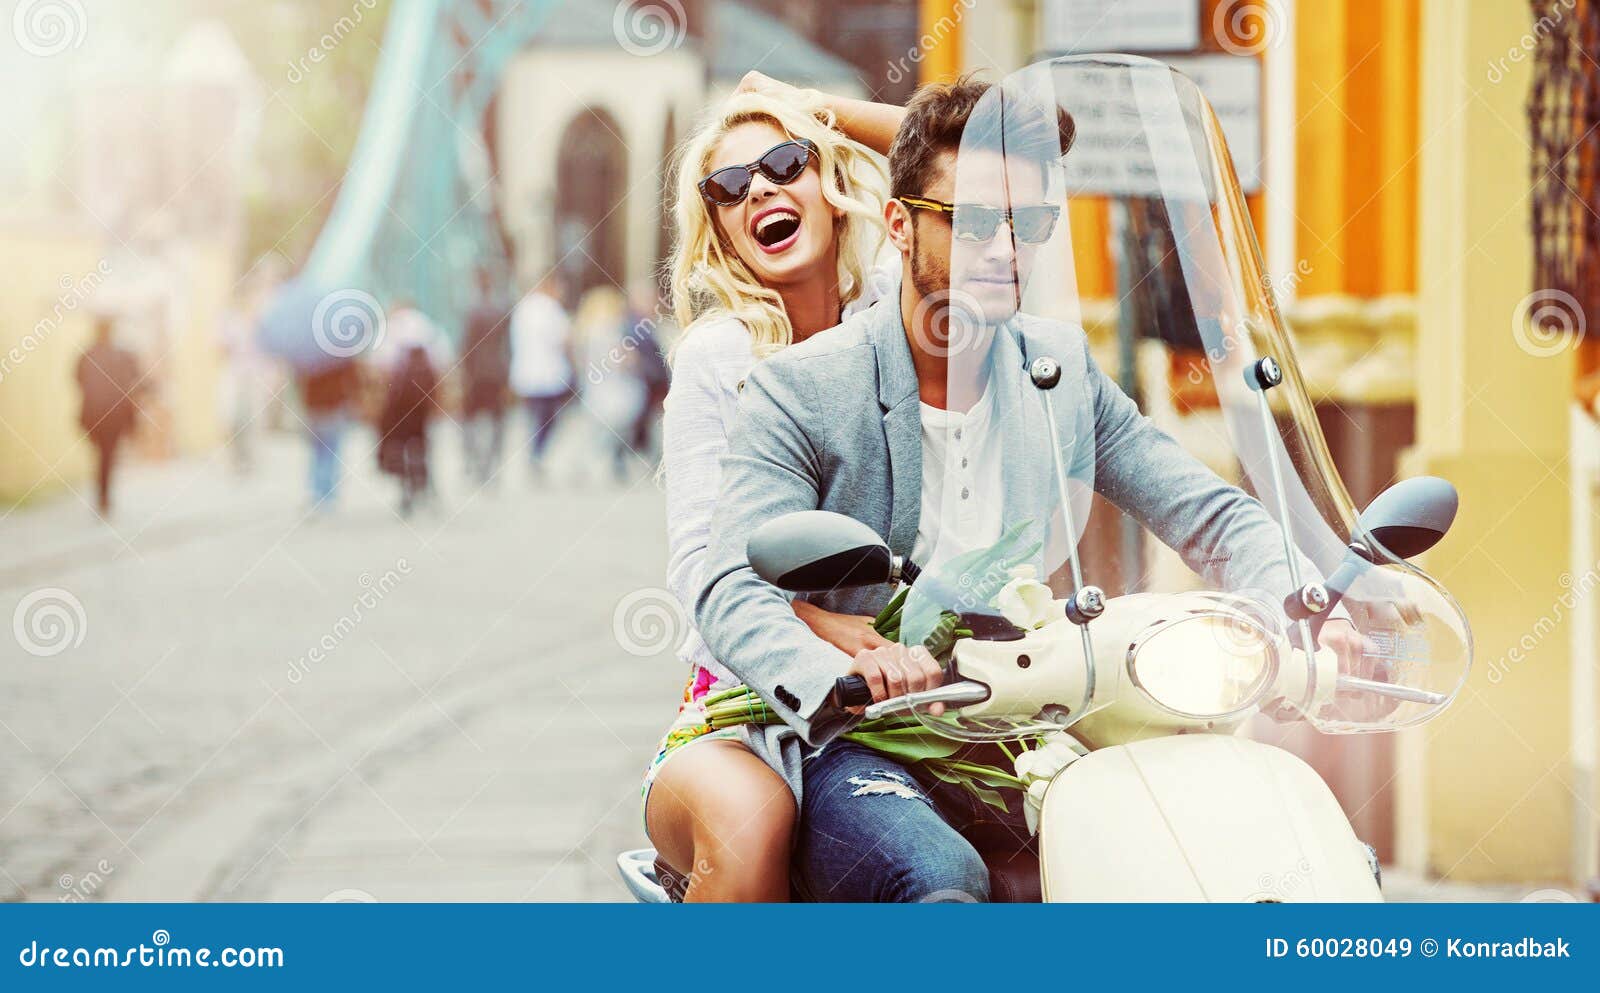 charimgn lady riding a retro scooter with her boyfriend